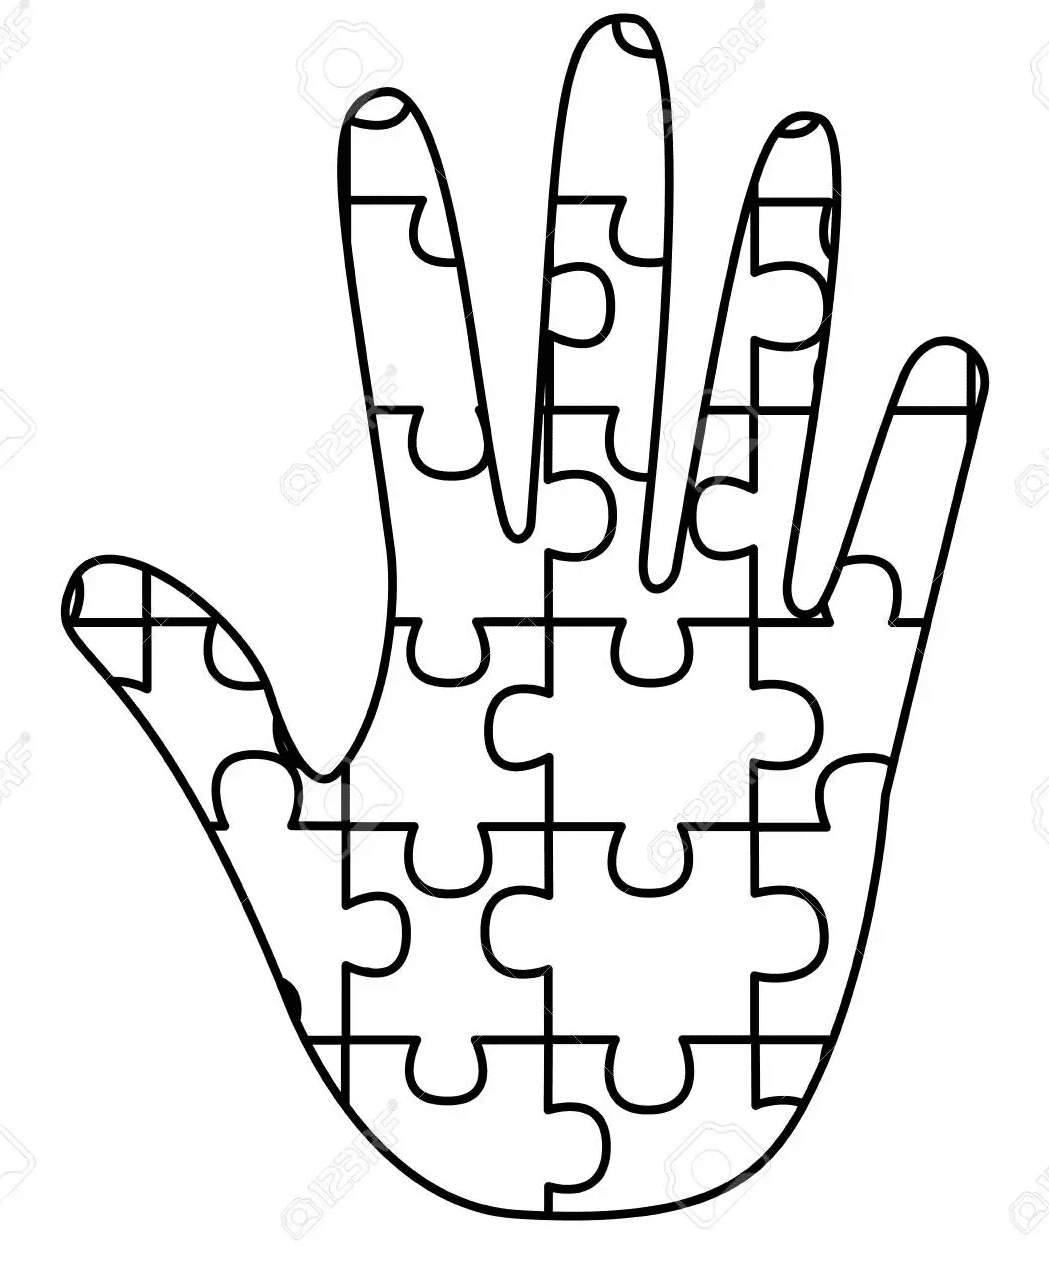 Hand Puzzle Pieces For Autism Awareness Coloring Pages - Autism Awareness Coloring  Pages - Coloring Pages For Kids And Adults